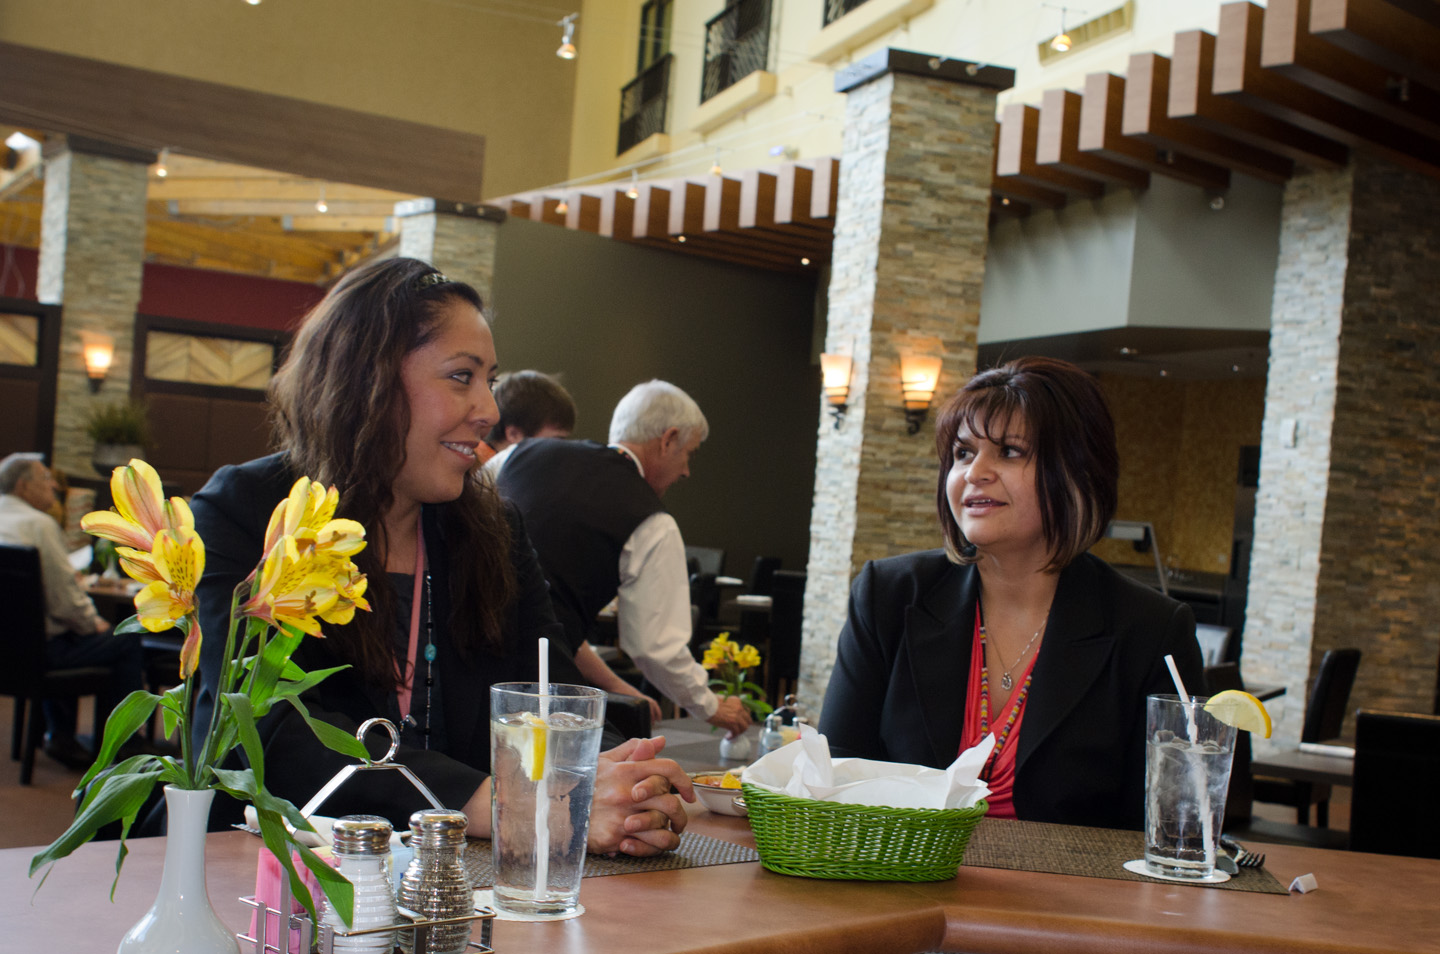 Krista Red and Lori Todacheene (left) share conversation and a bite to eat in the newly opened Willows Café & Bistro at the Sky Ute Casino Resort on Wednesday, April 17.